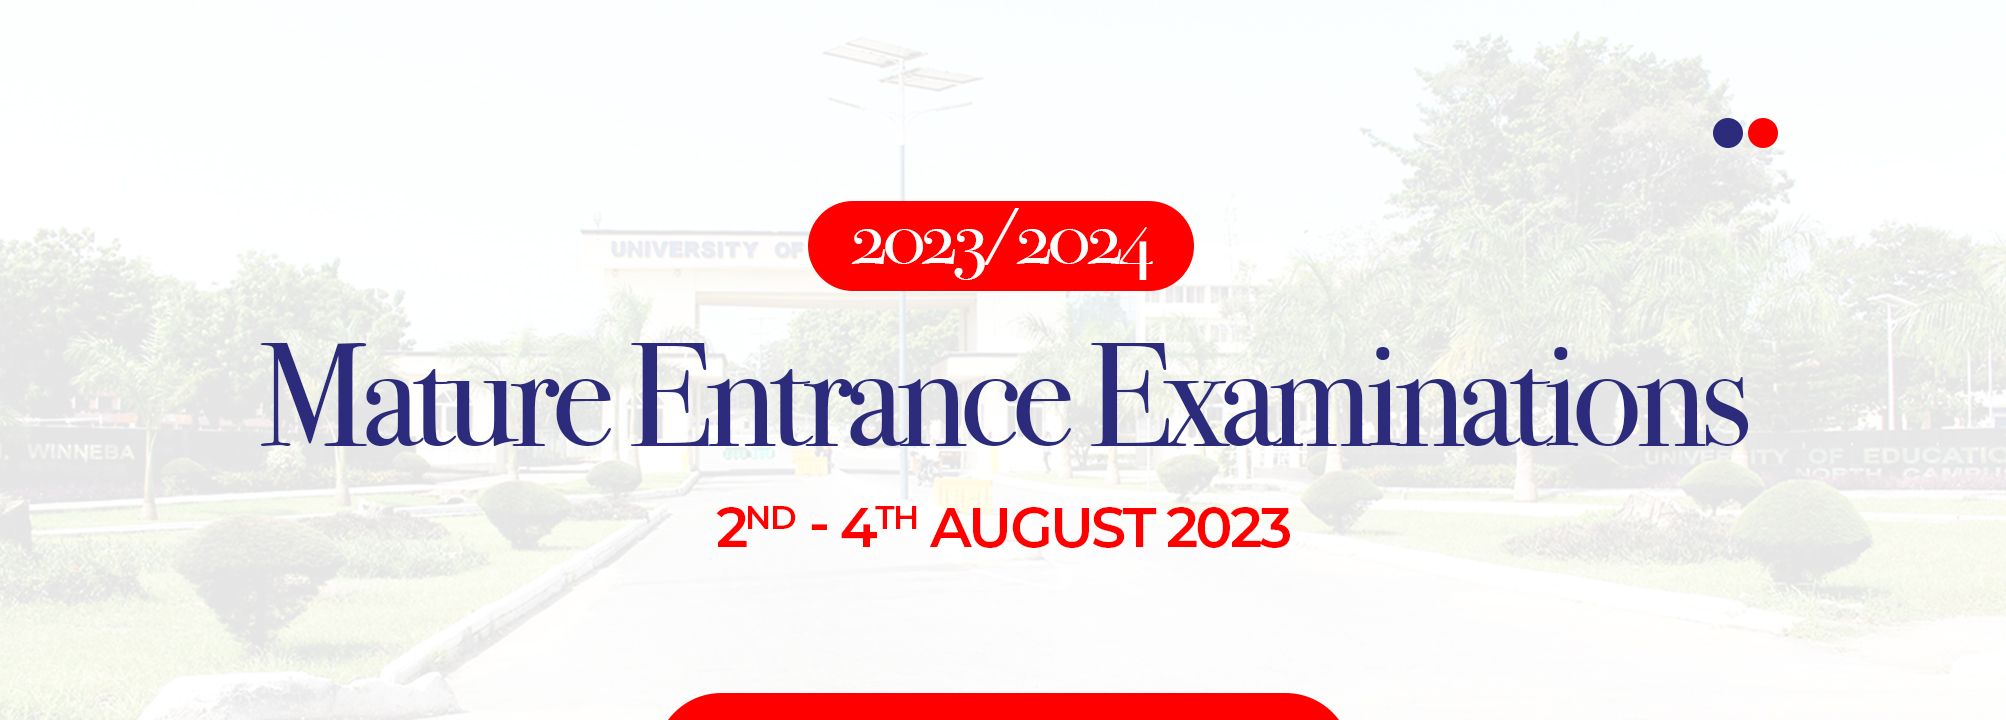 UEW Timetable For Mature Entrance Examinations - 2023/2024